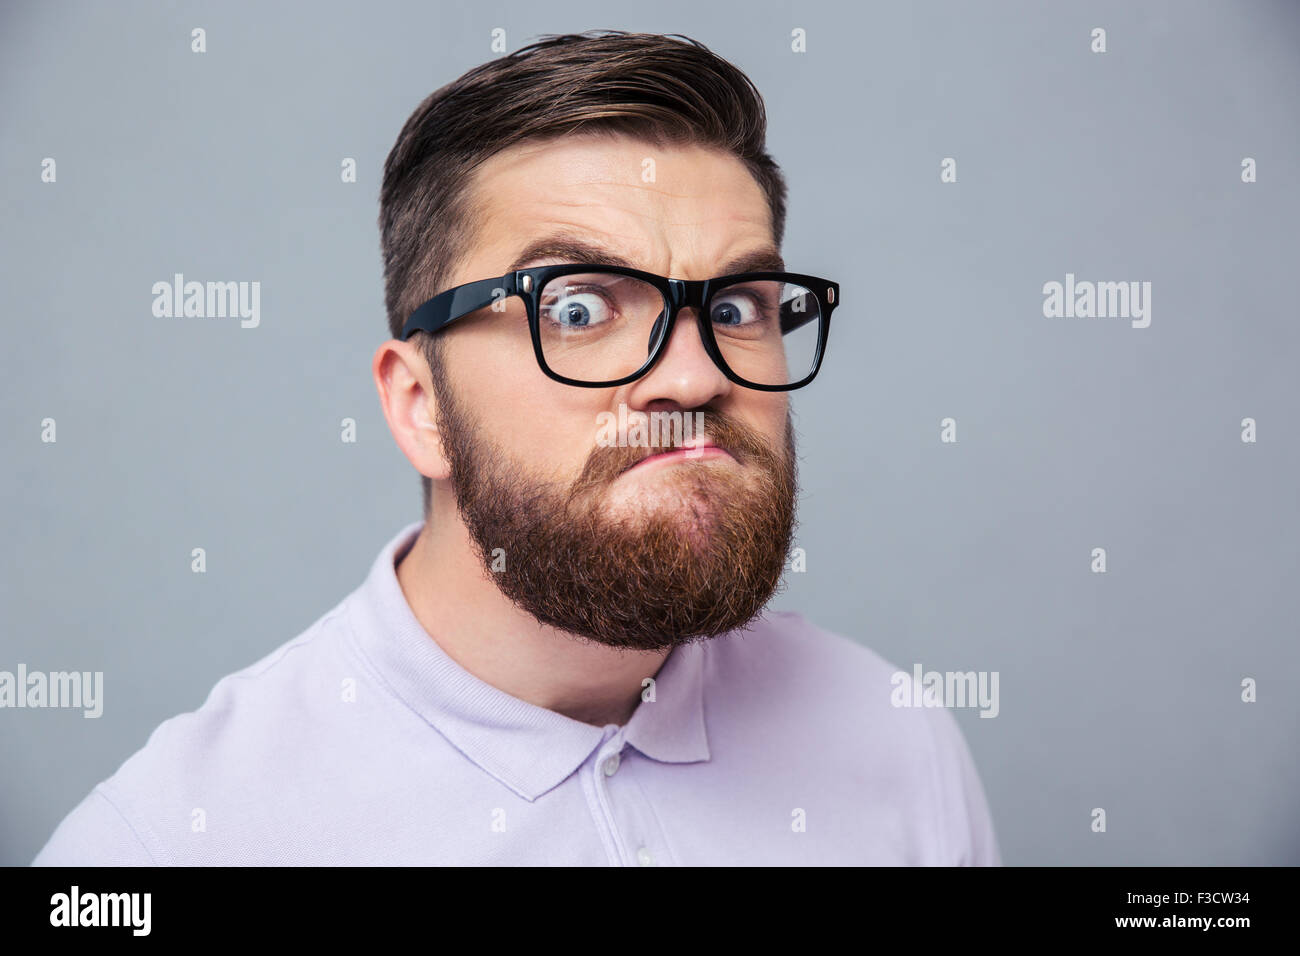 Portrait of a funny hipster man looking at camera over gray background Stock Photo